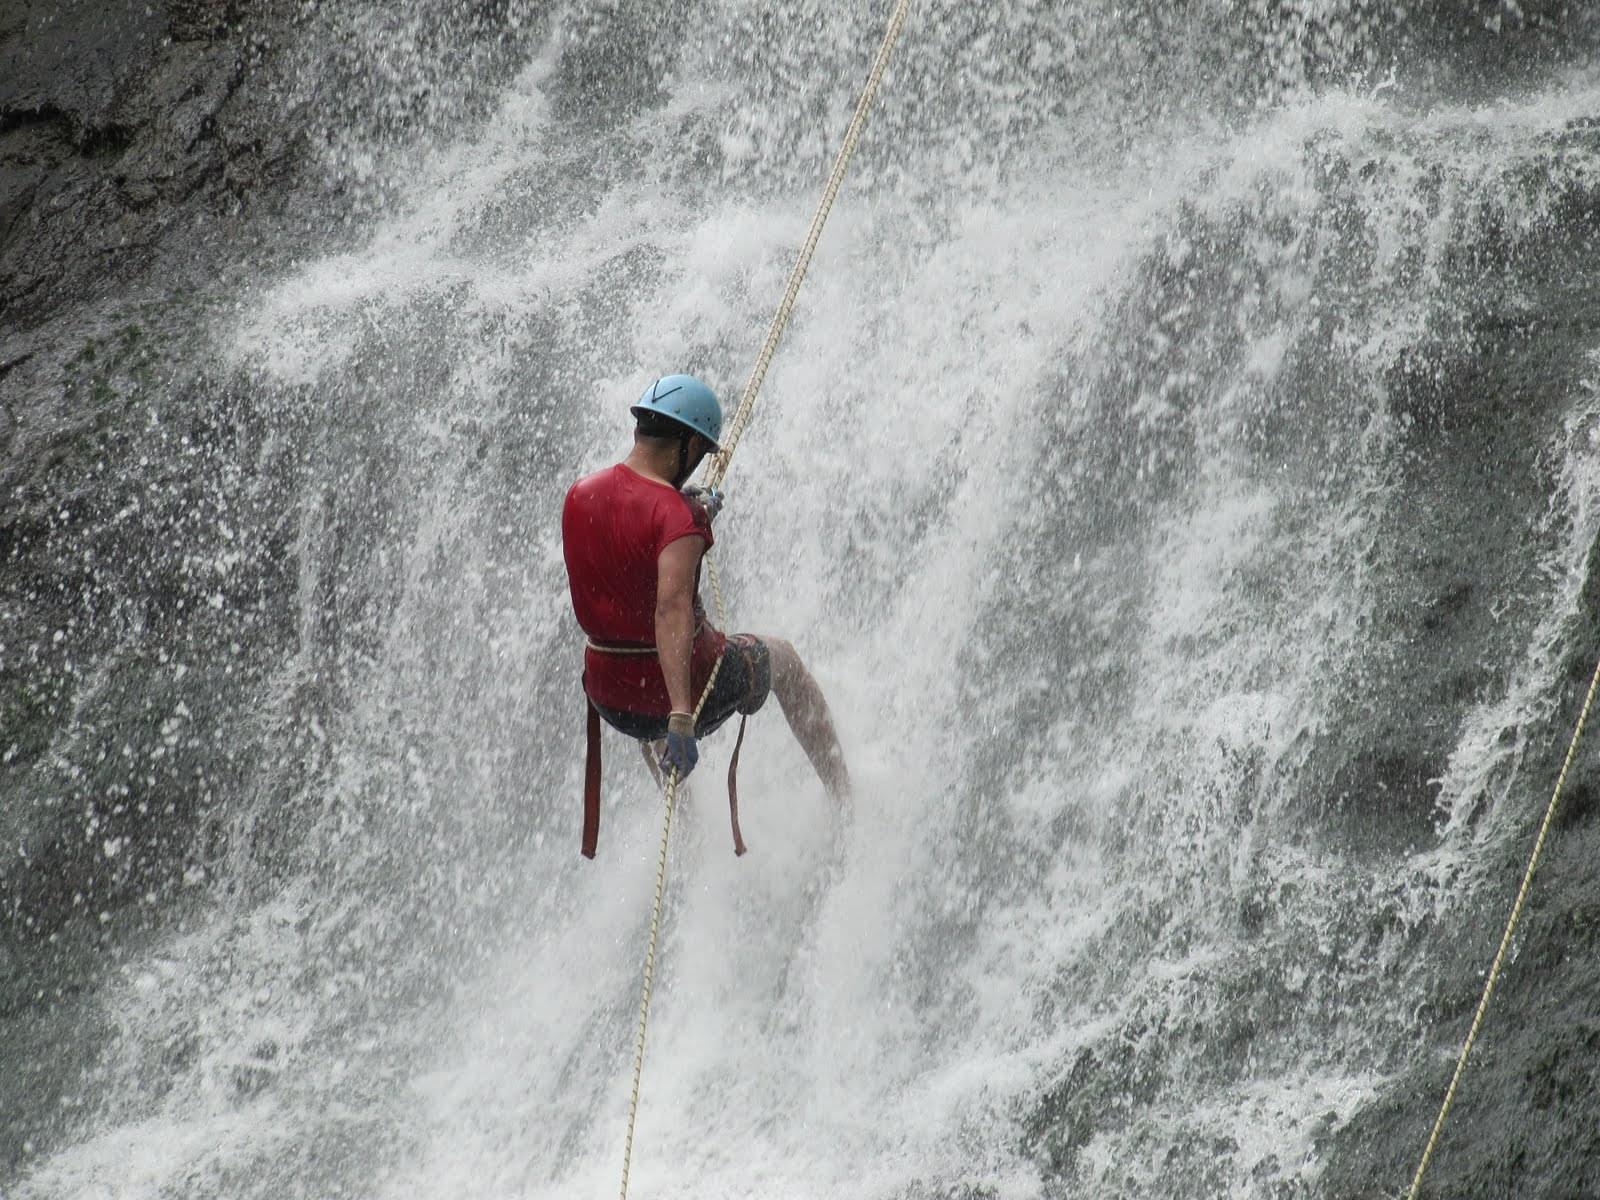 Waterfall Rappelling At Torna From Pune